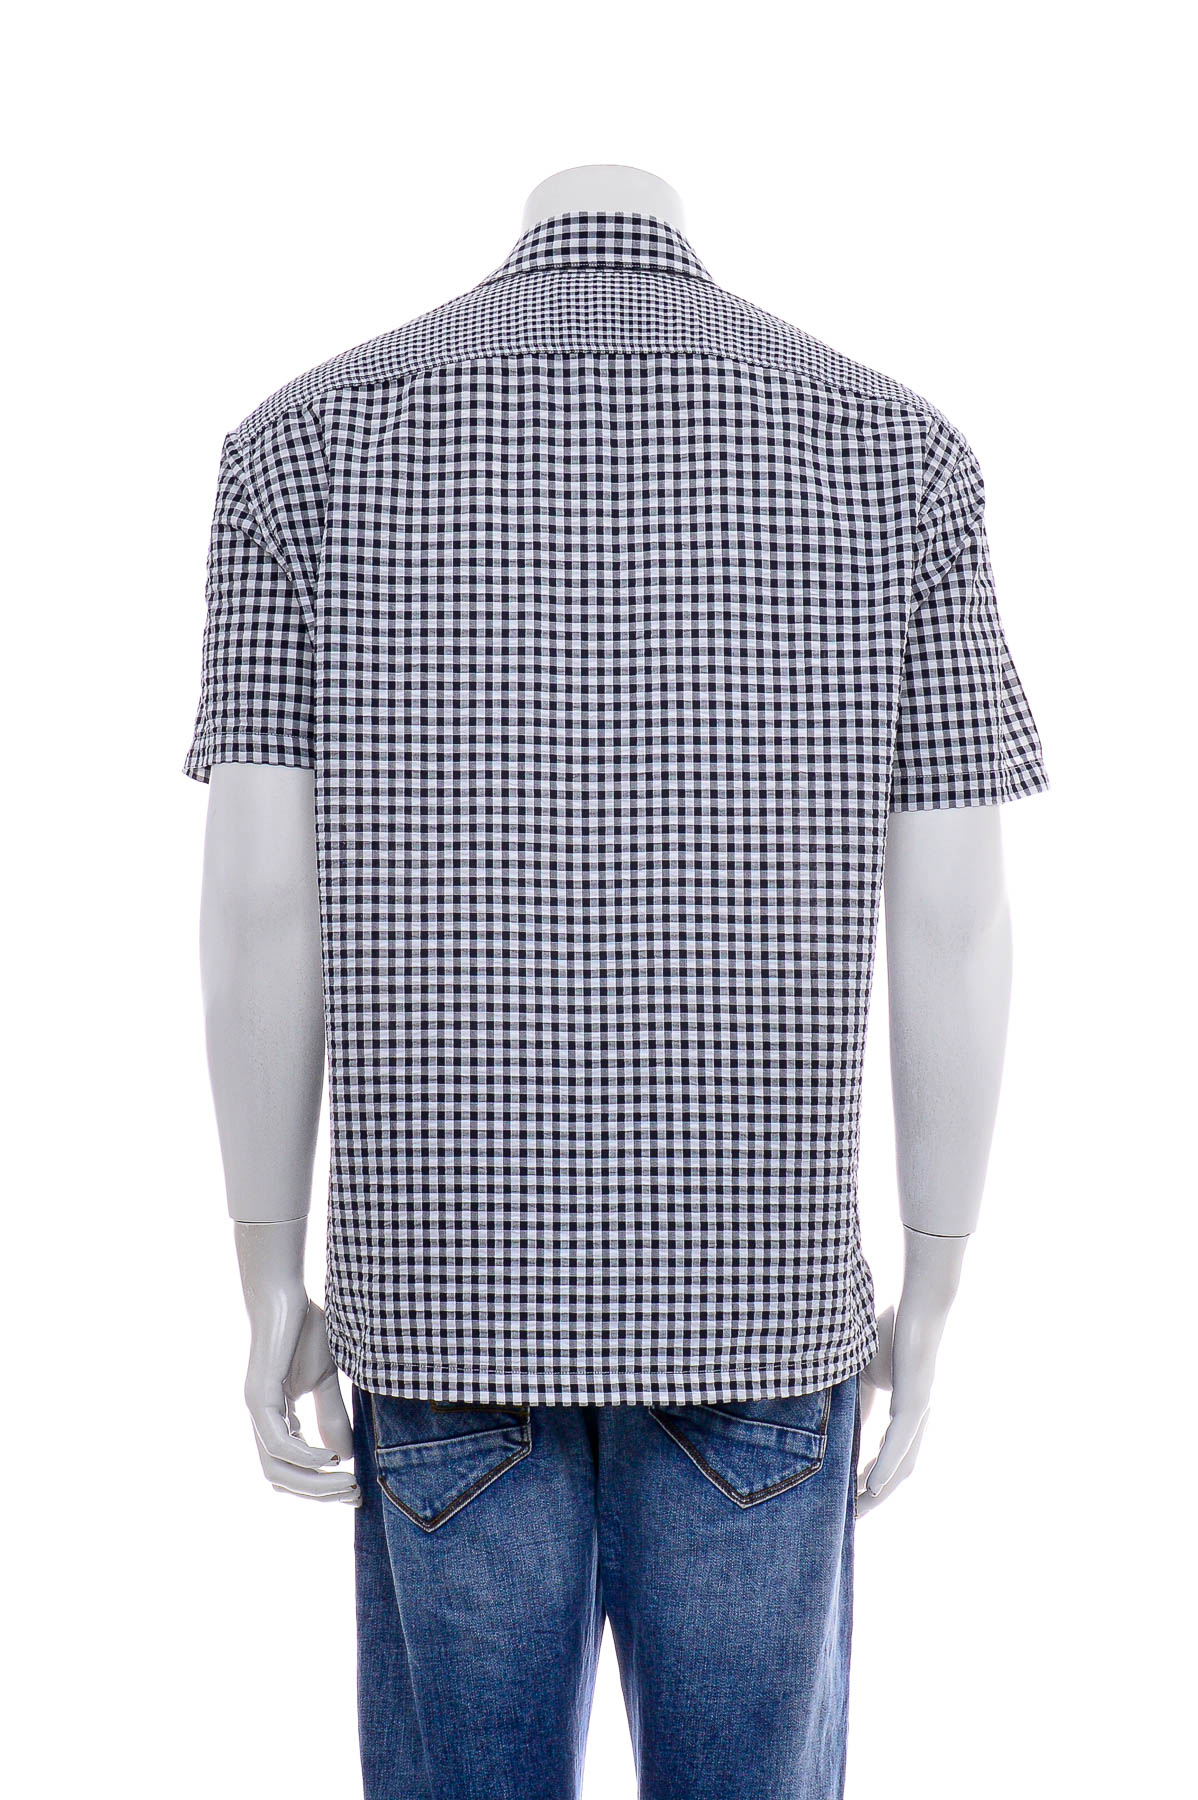 Men's shirt - JW ANDERSON and UNIQLO - 1